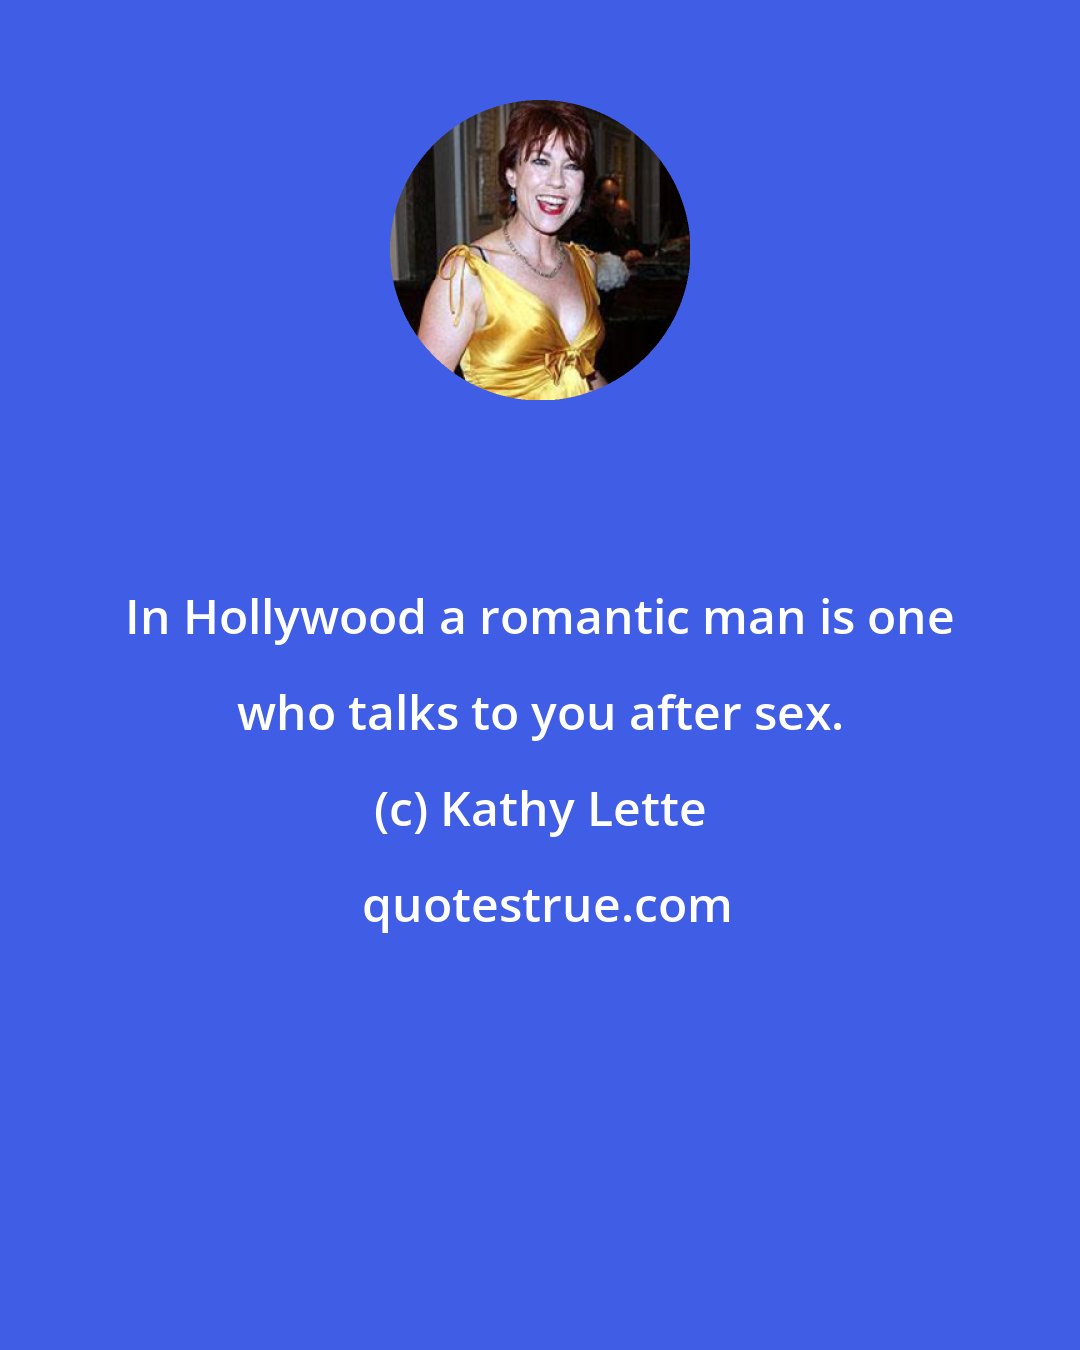 Kathy Lette: In Hollywood a romantic man is one who talks to you after sex.